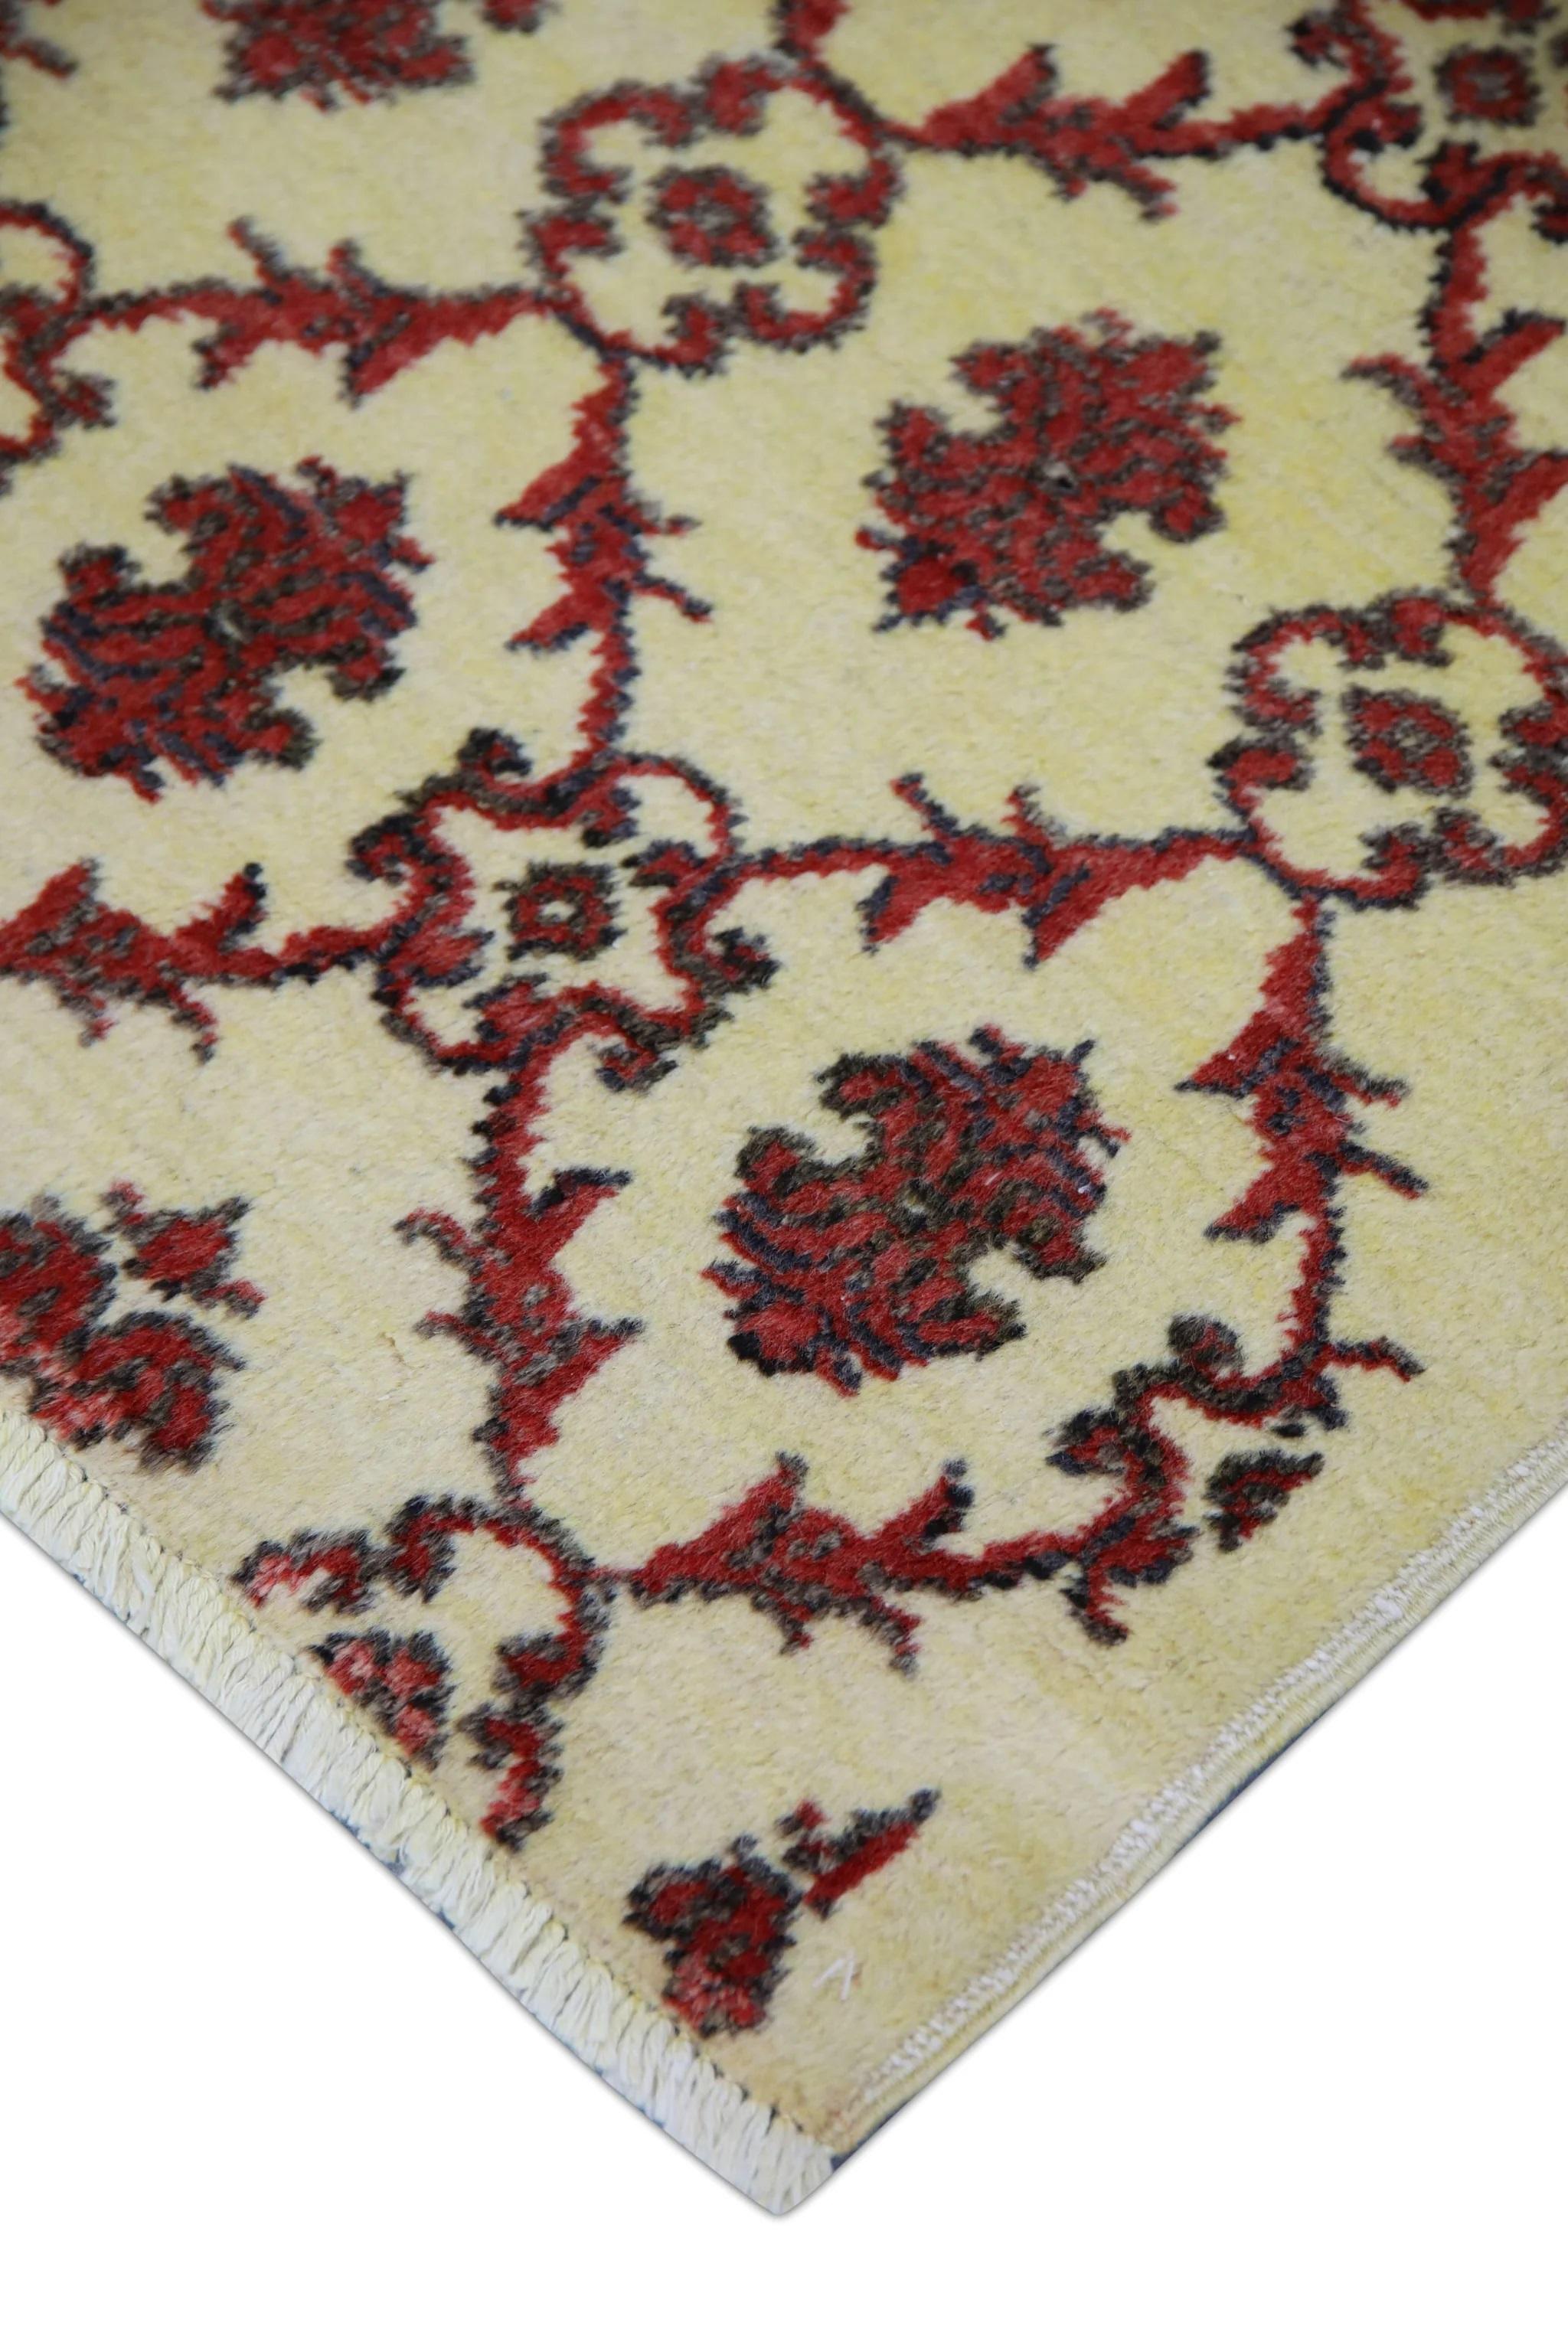 This exquisite vintage Turkish Oushak rug is a stunning example of traditional craftsmanship and timeless beauty. Hand-knotted from premium wool fibers, this rug features intricate patterns and vivid colors that are all naturally derived from